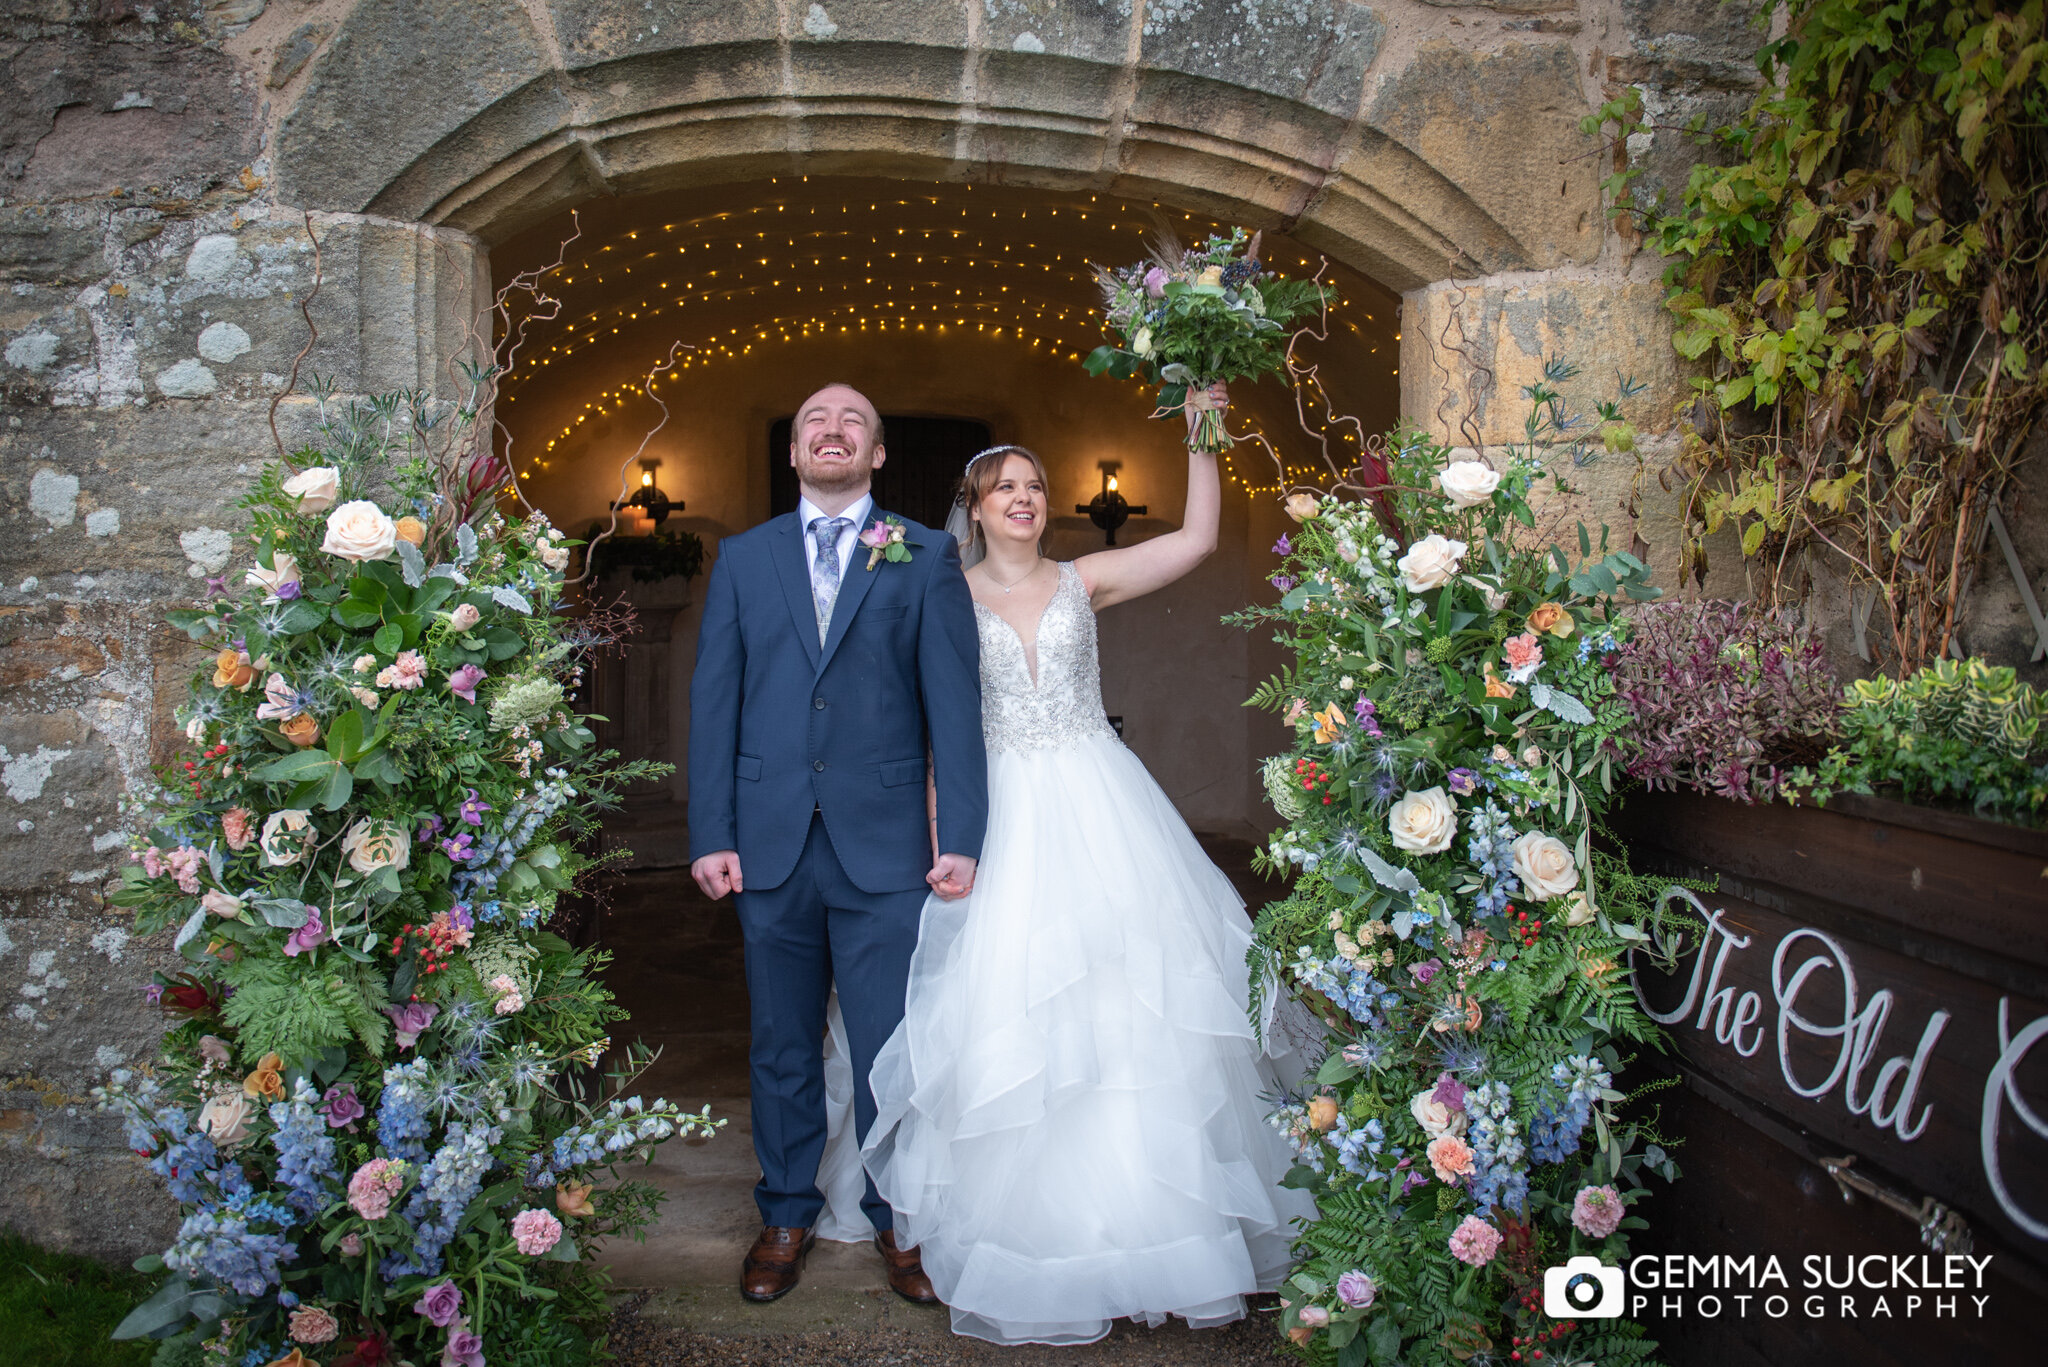 a just married couple looking relived to tie the knot at the priest house at barden tower